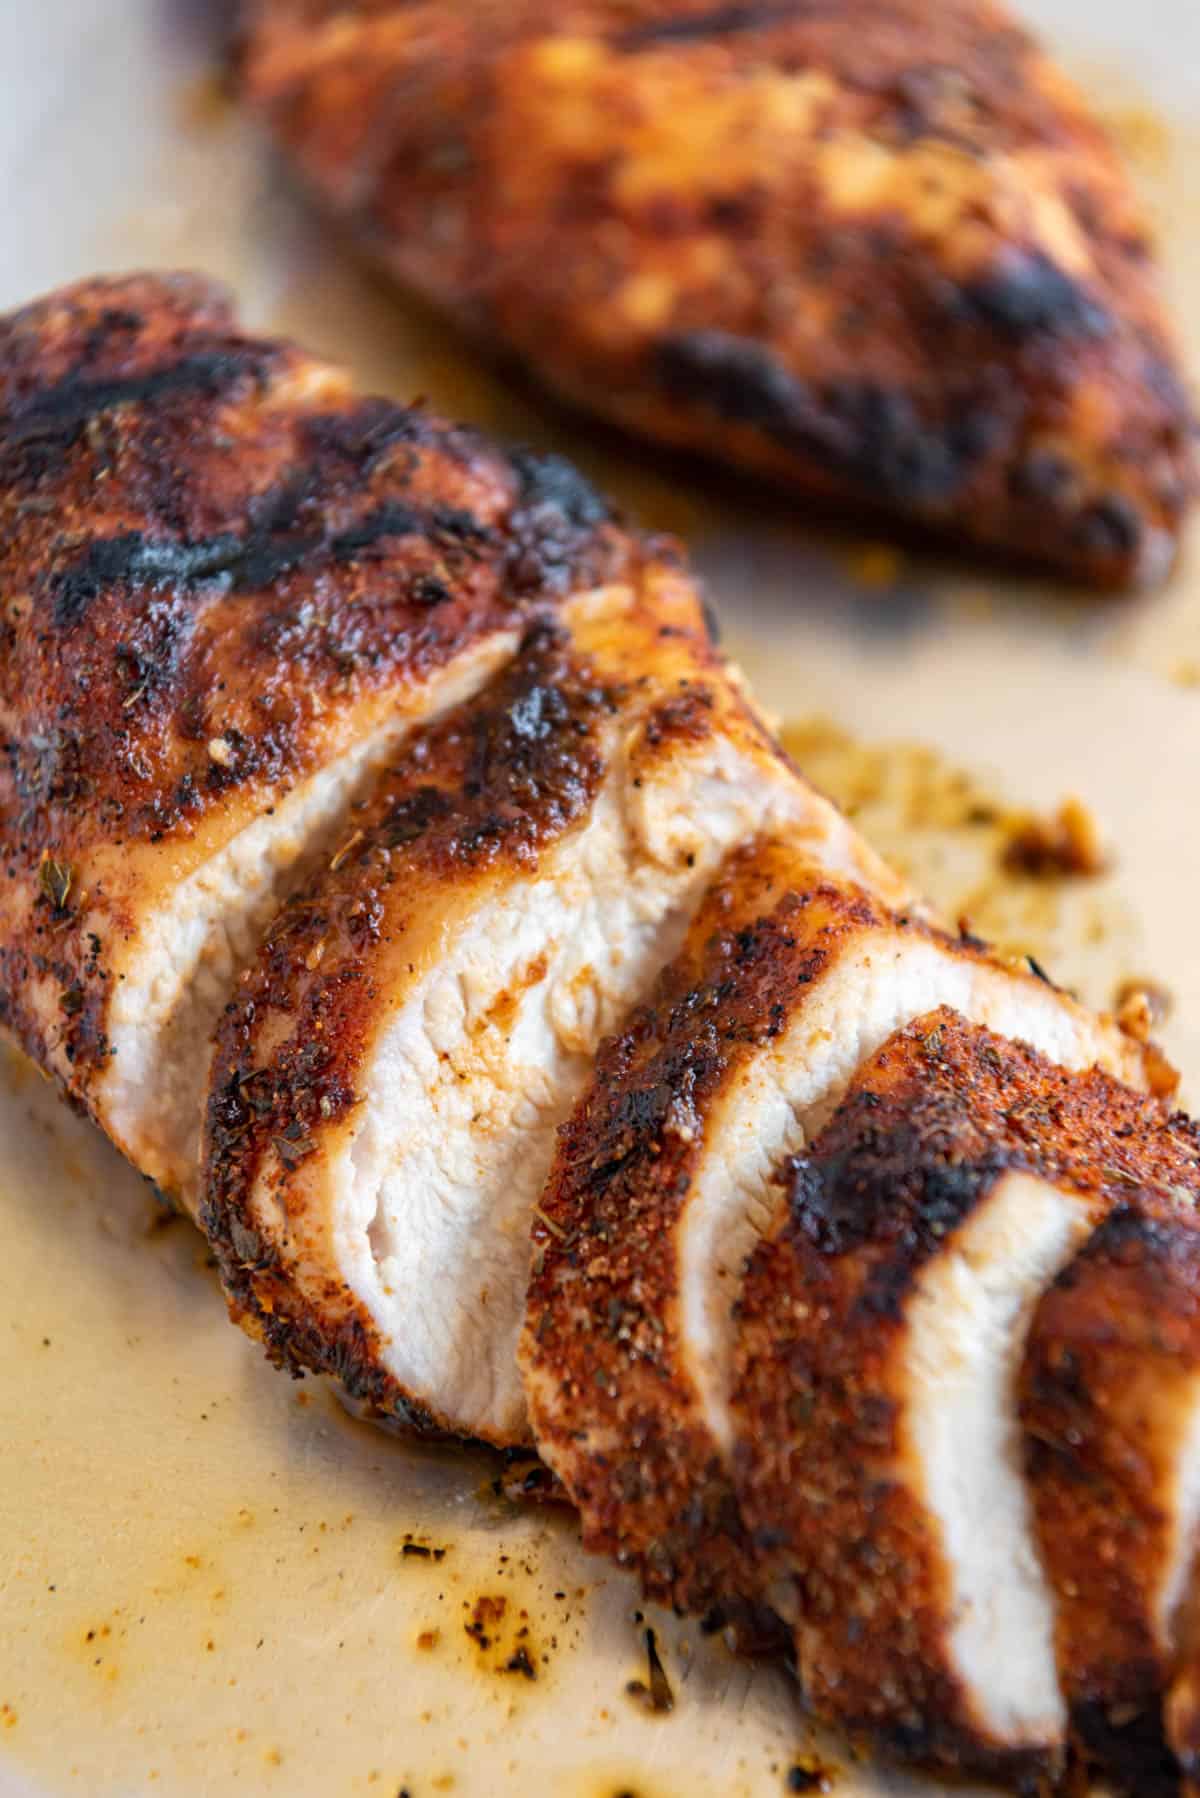 Grilled Cajun chicken breasts one is whole and one is sliced.